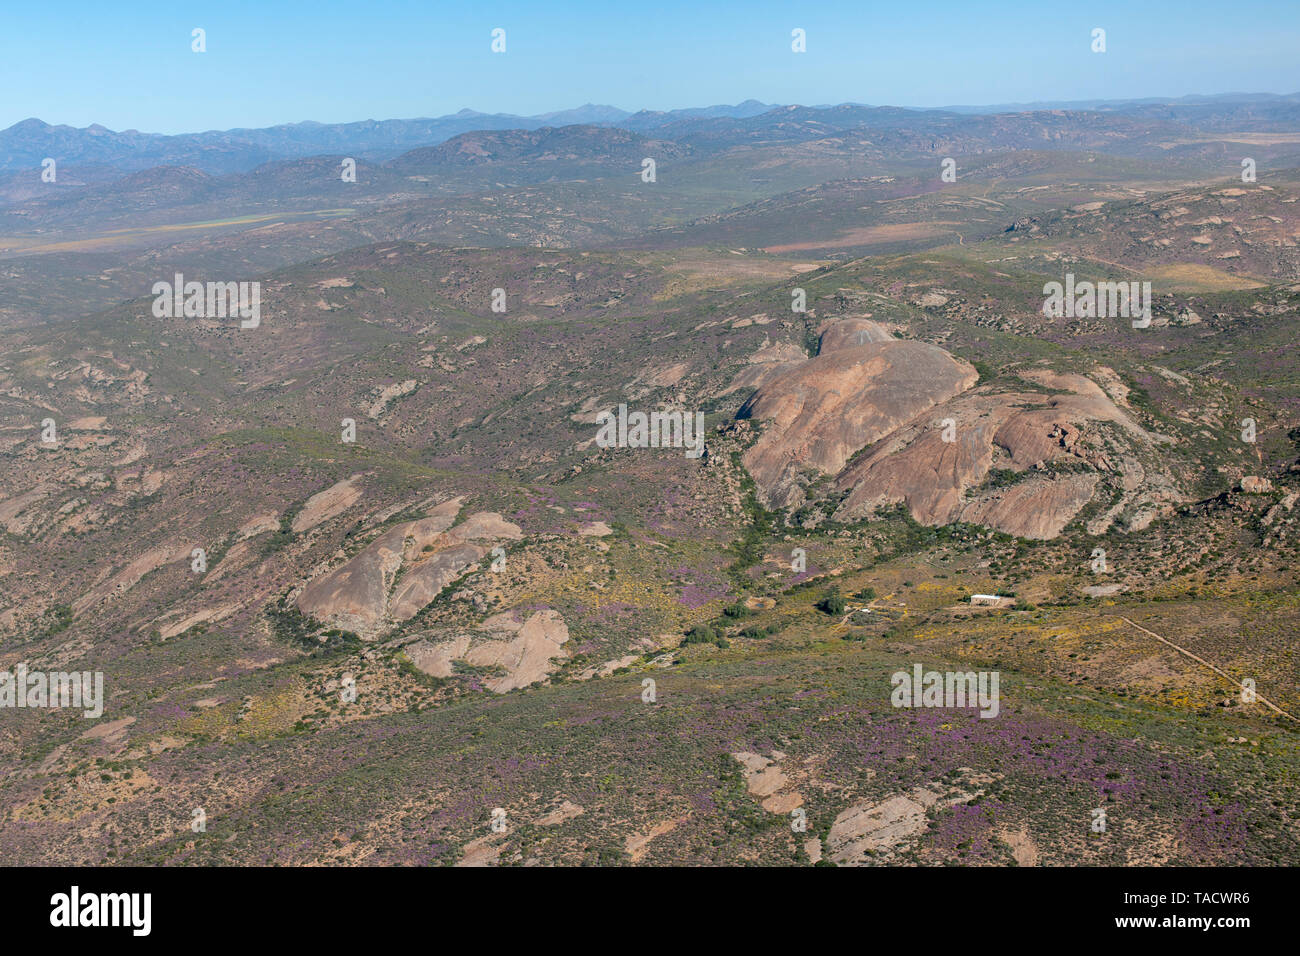 Aerial view of the landscape south of the town of Springbok in the Northern Cape Province of South Africa. Stock Photo